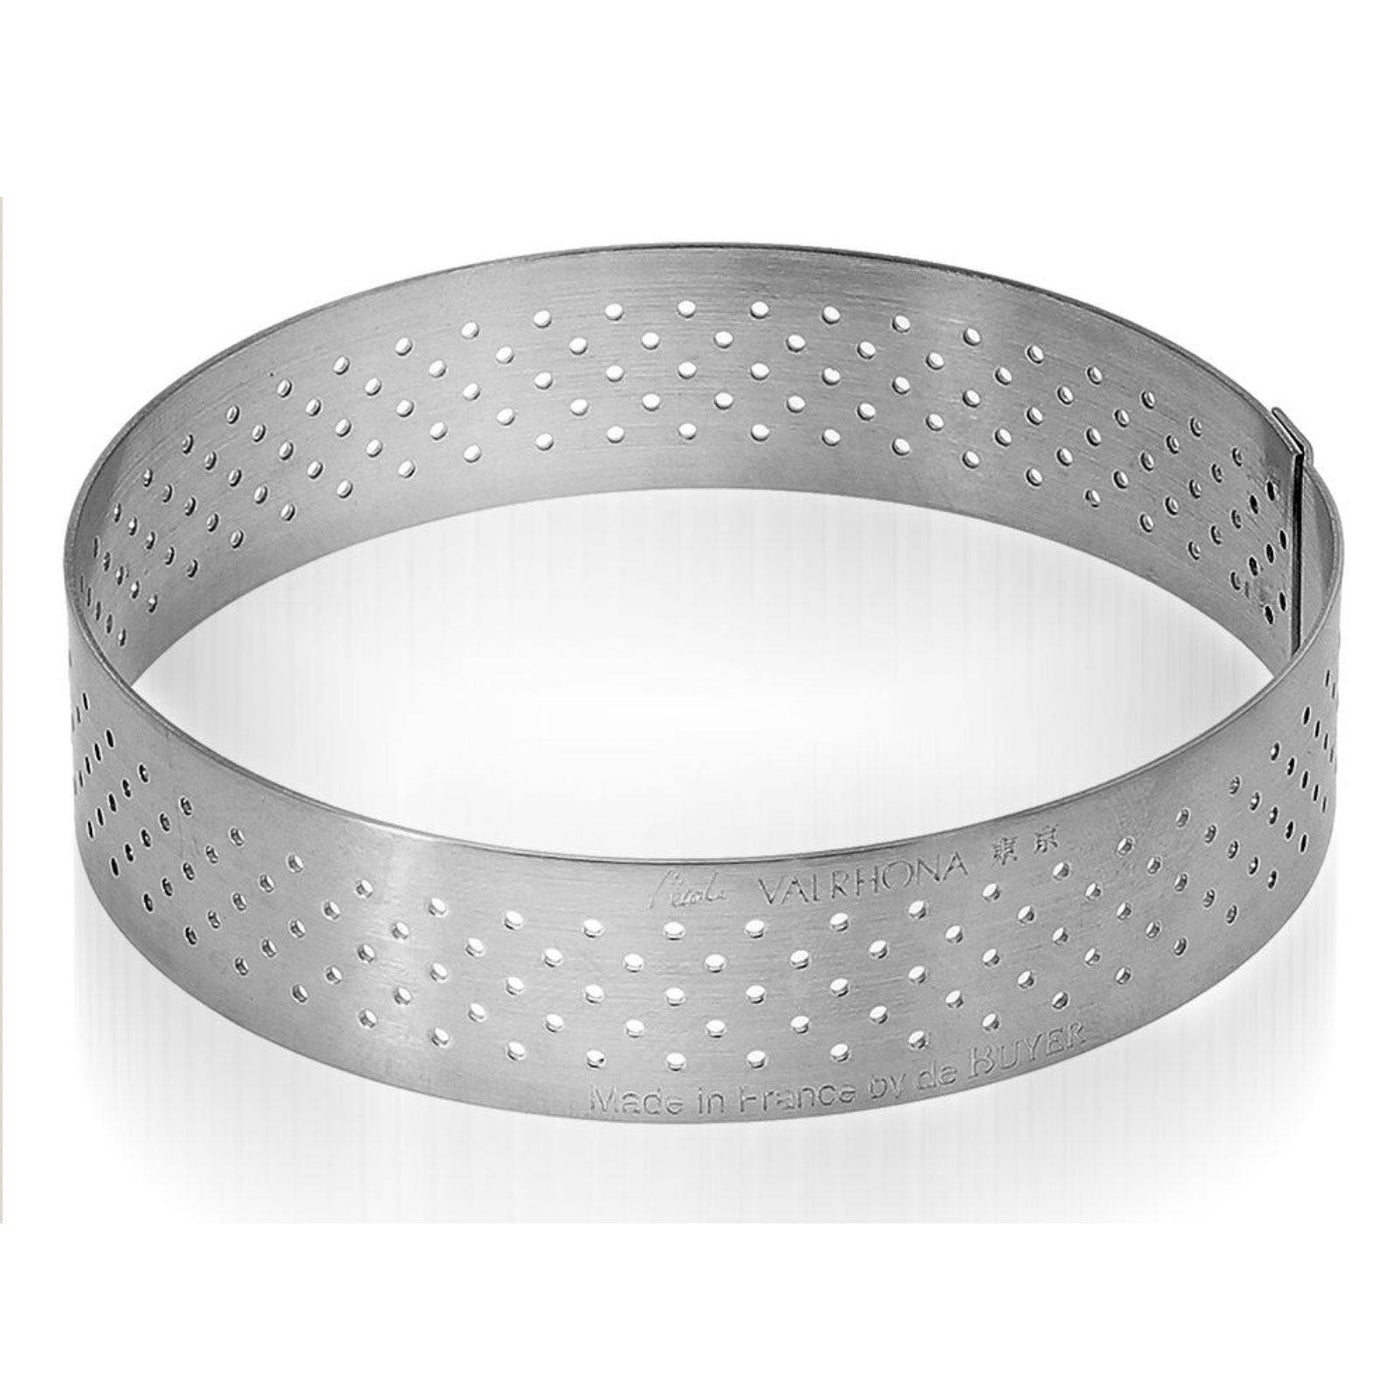 de Buyer Valrhona Stainless Steel Perforated Tart Ring, 8-in - Kitchen Universe